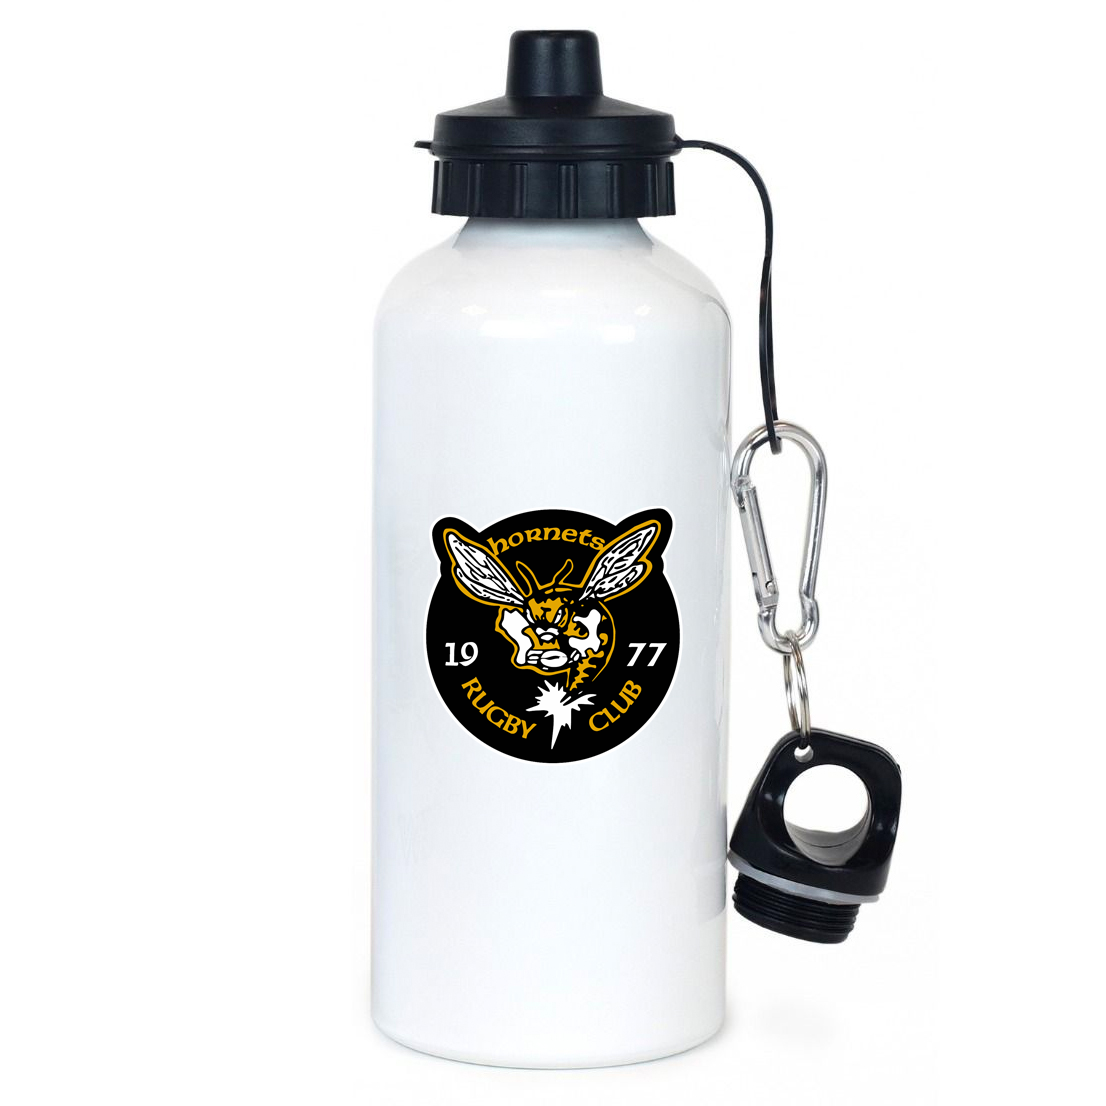 St. Louis Hornets Rugby Club Team Water Bottle